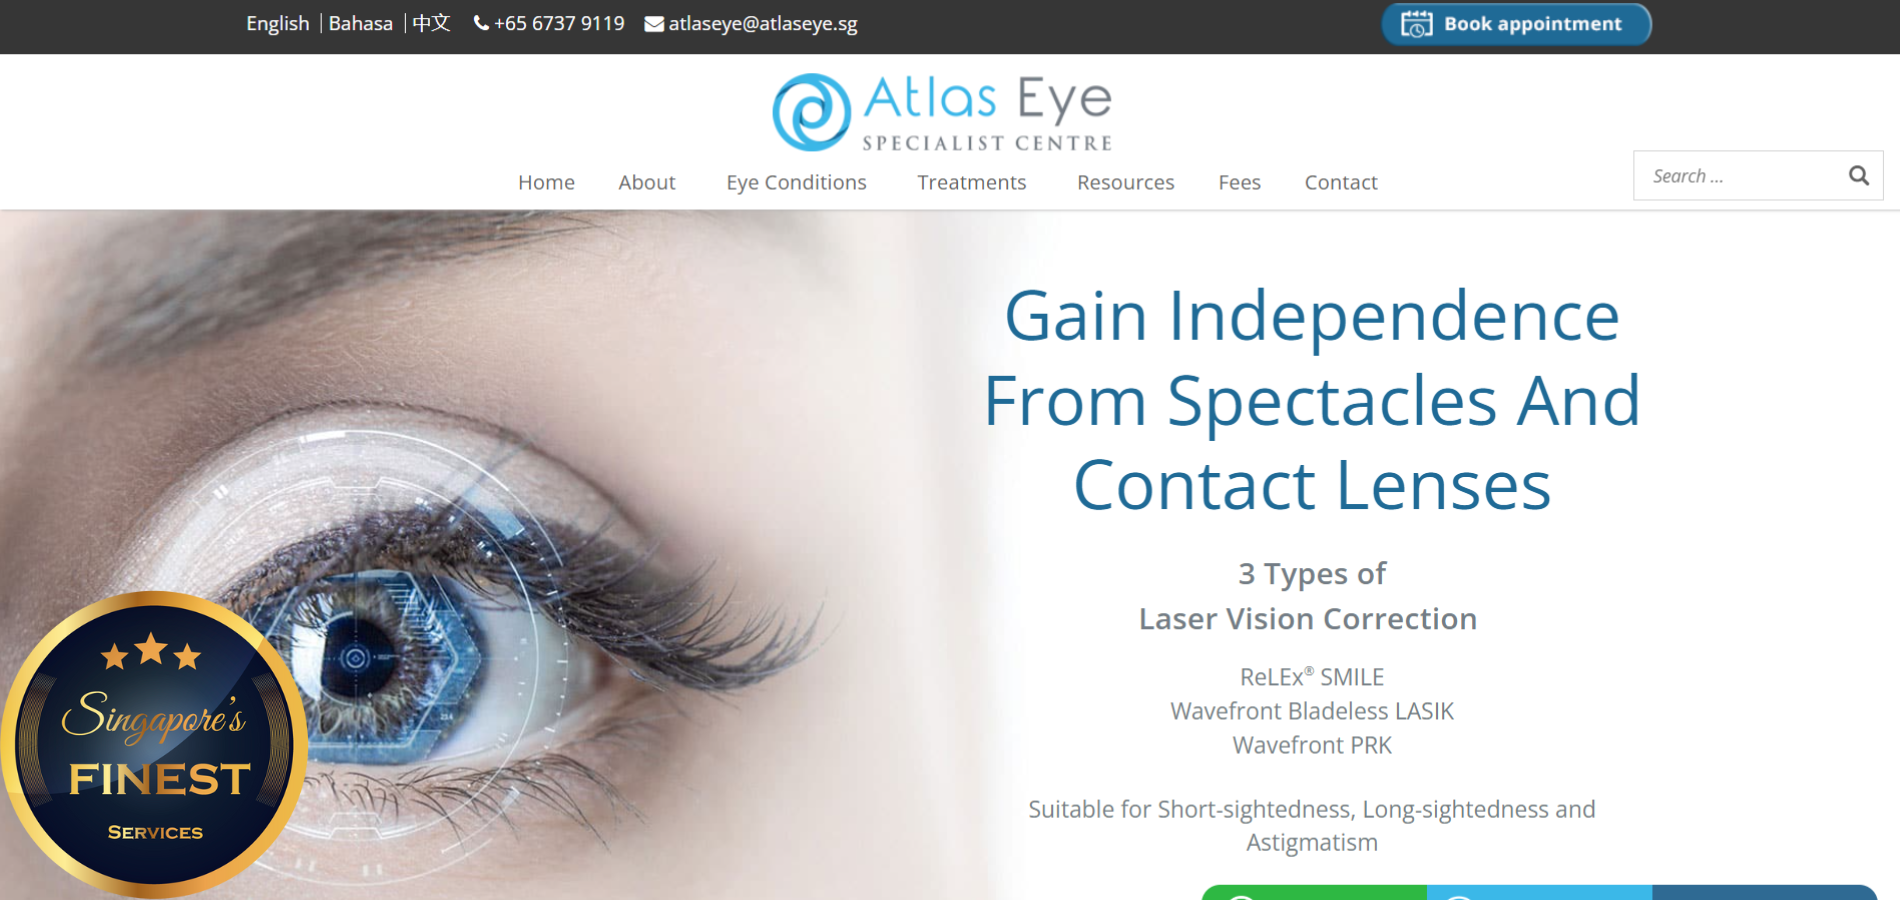 The 10 Finest LASIK Clinics in Singapore